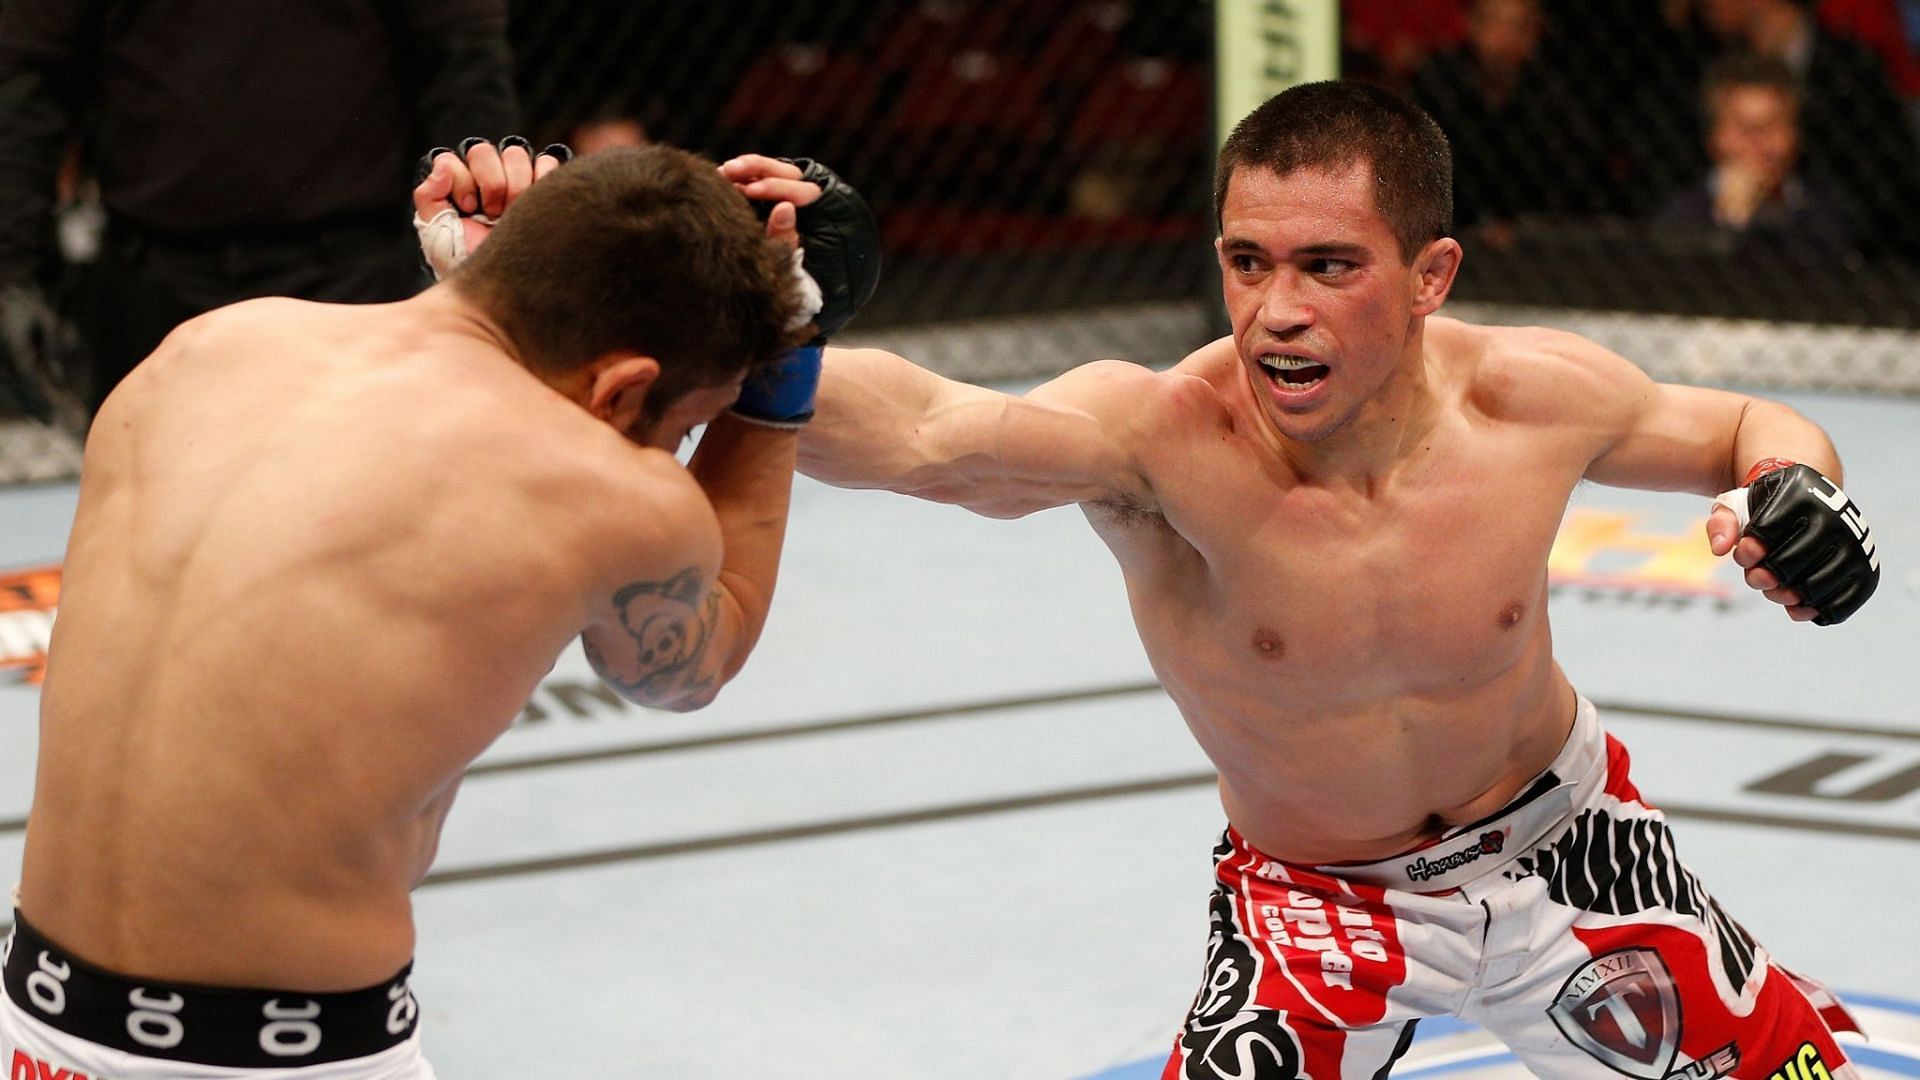 Chris Cariaso received a title shot in 2014 despite a lack of major wins in the octagon